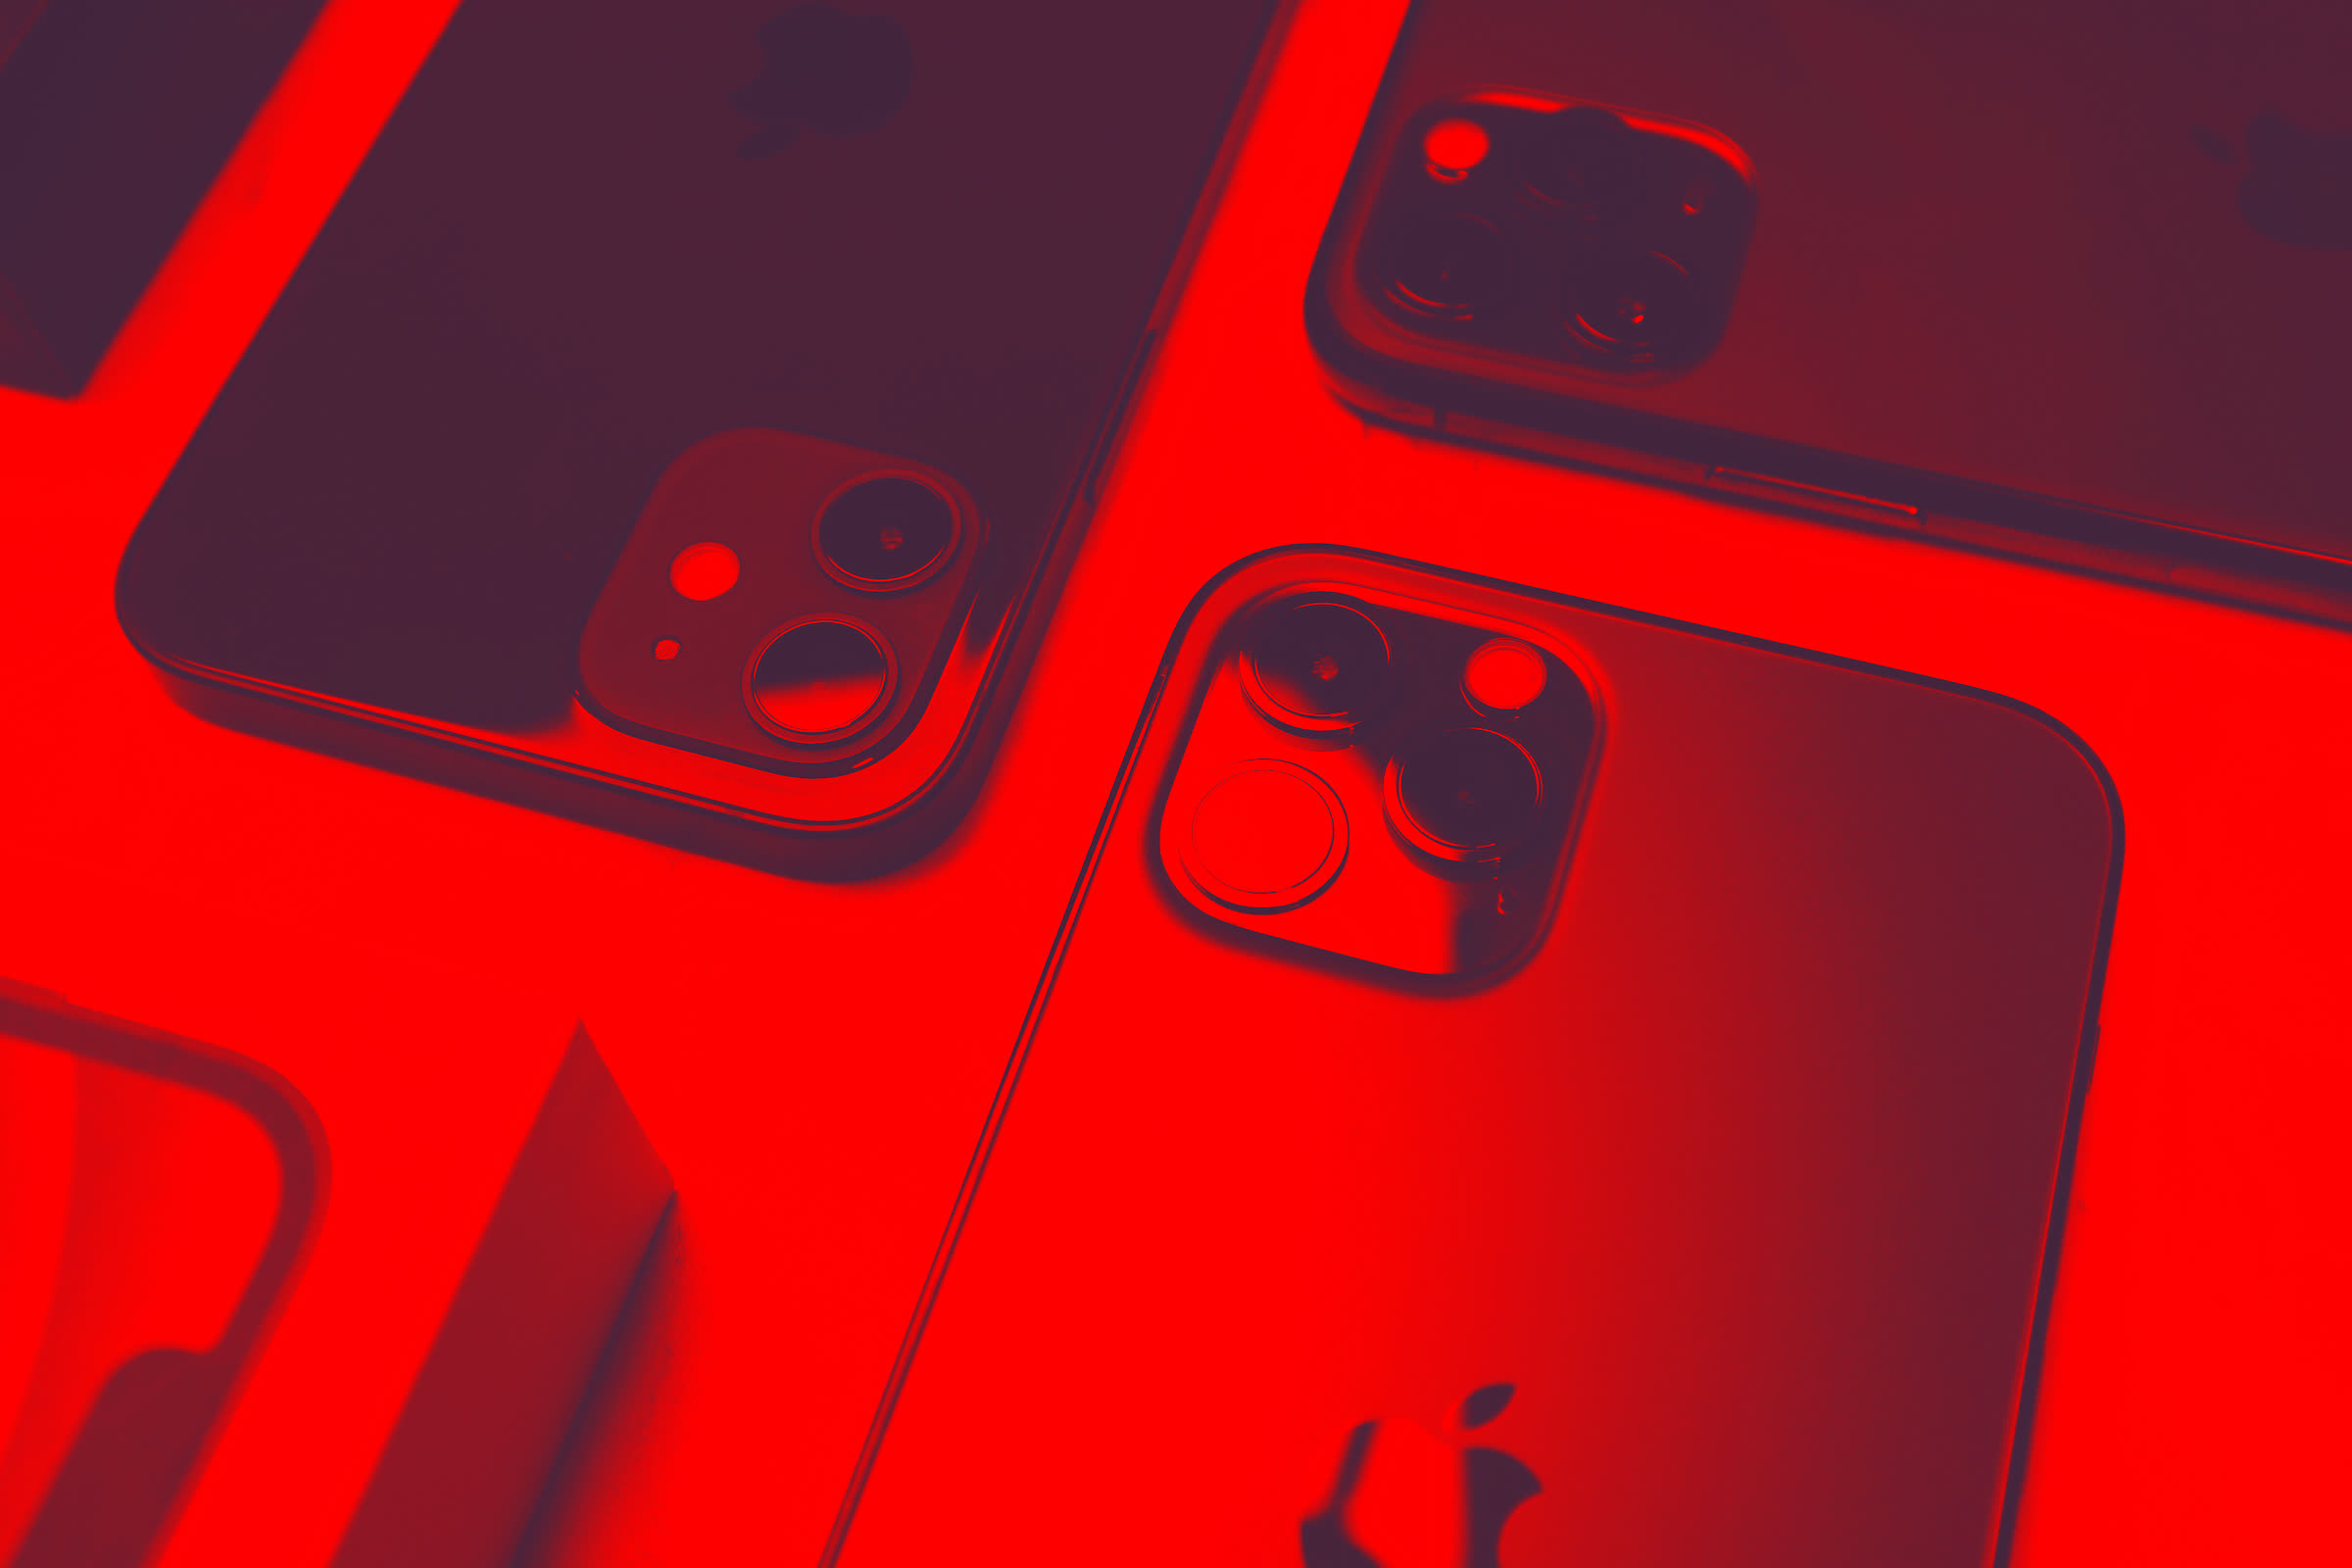 Apple iPhone zero-click exploit has been infecting phones with &#8216;Triangulation&#8217; spyware since 2019